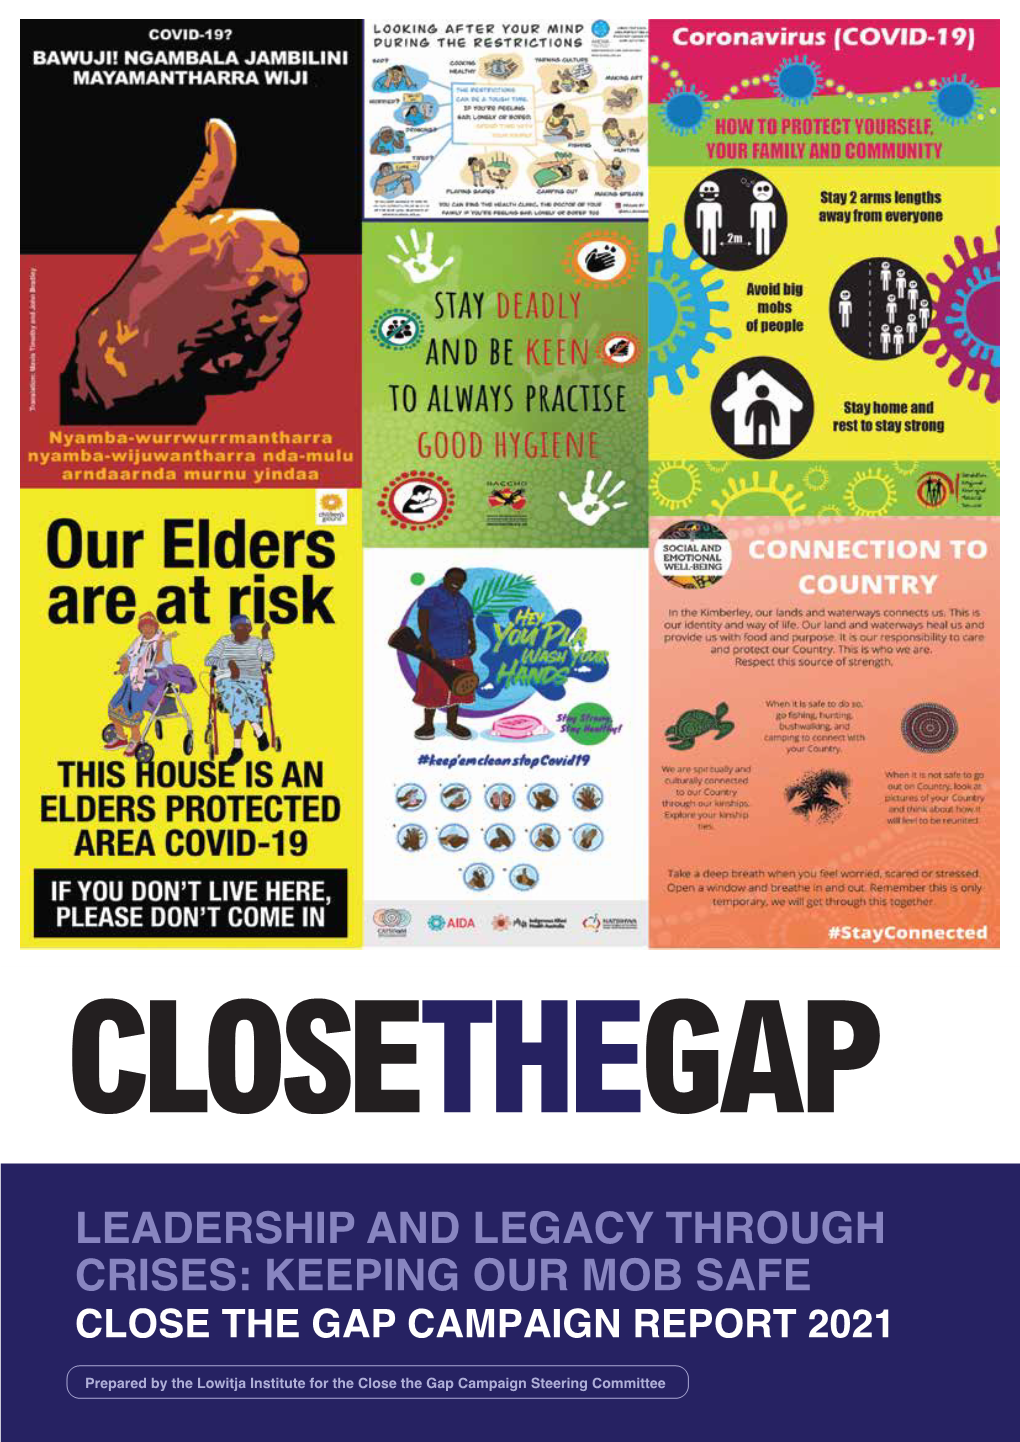 Keeping Our Mob Safe Close the Gap Campaign Report 2021